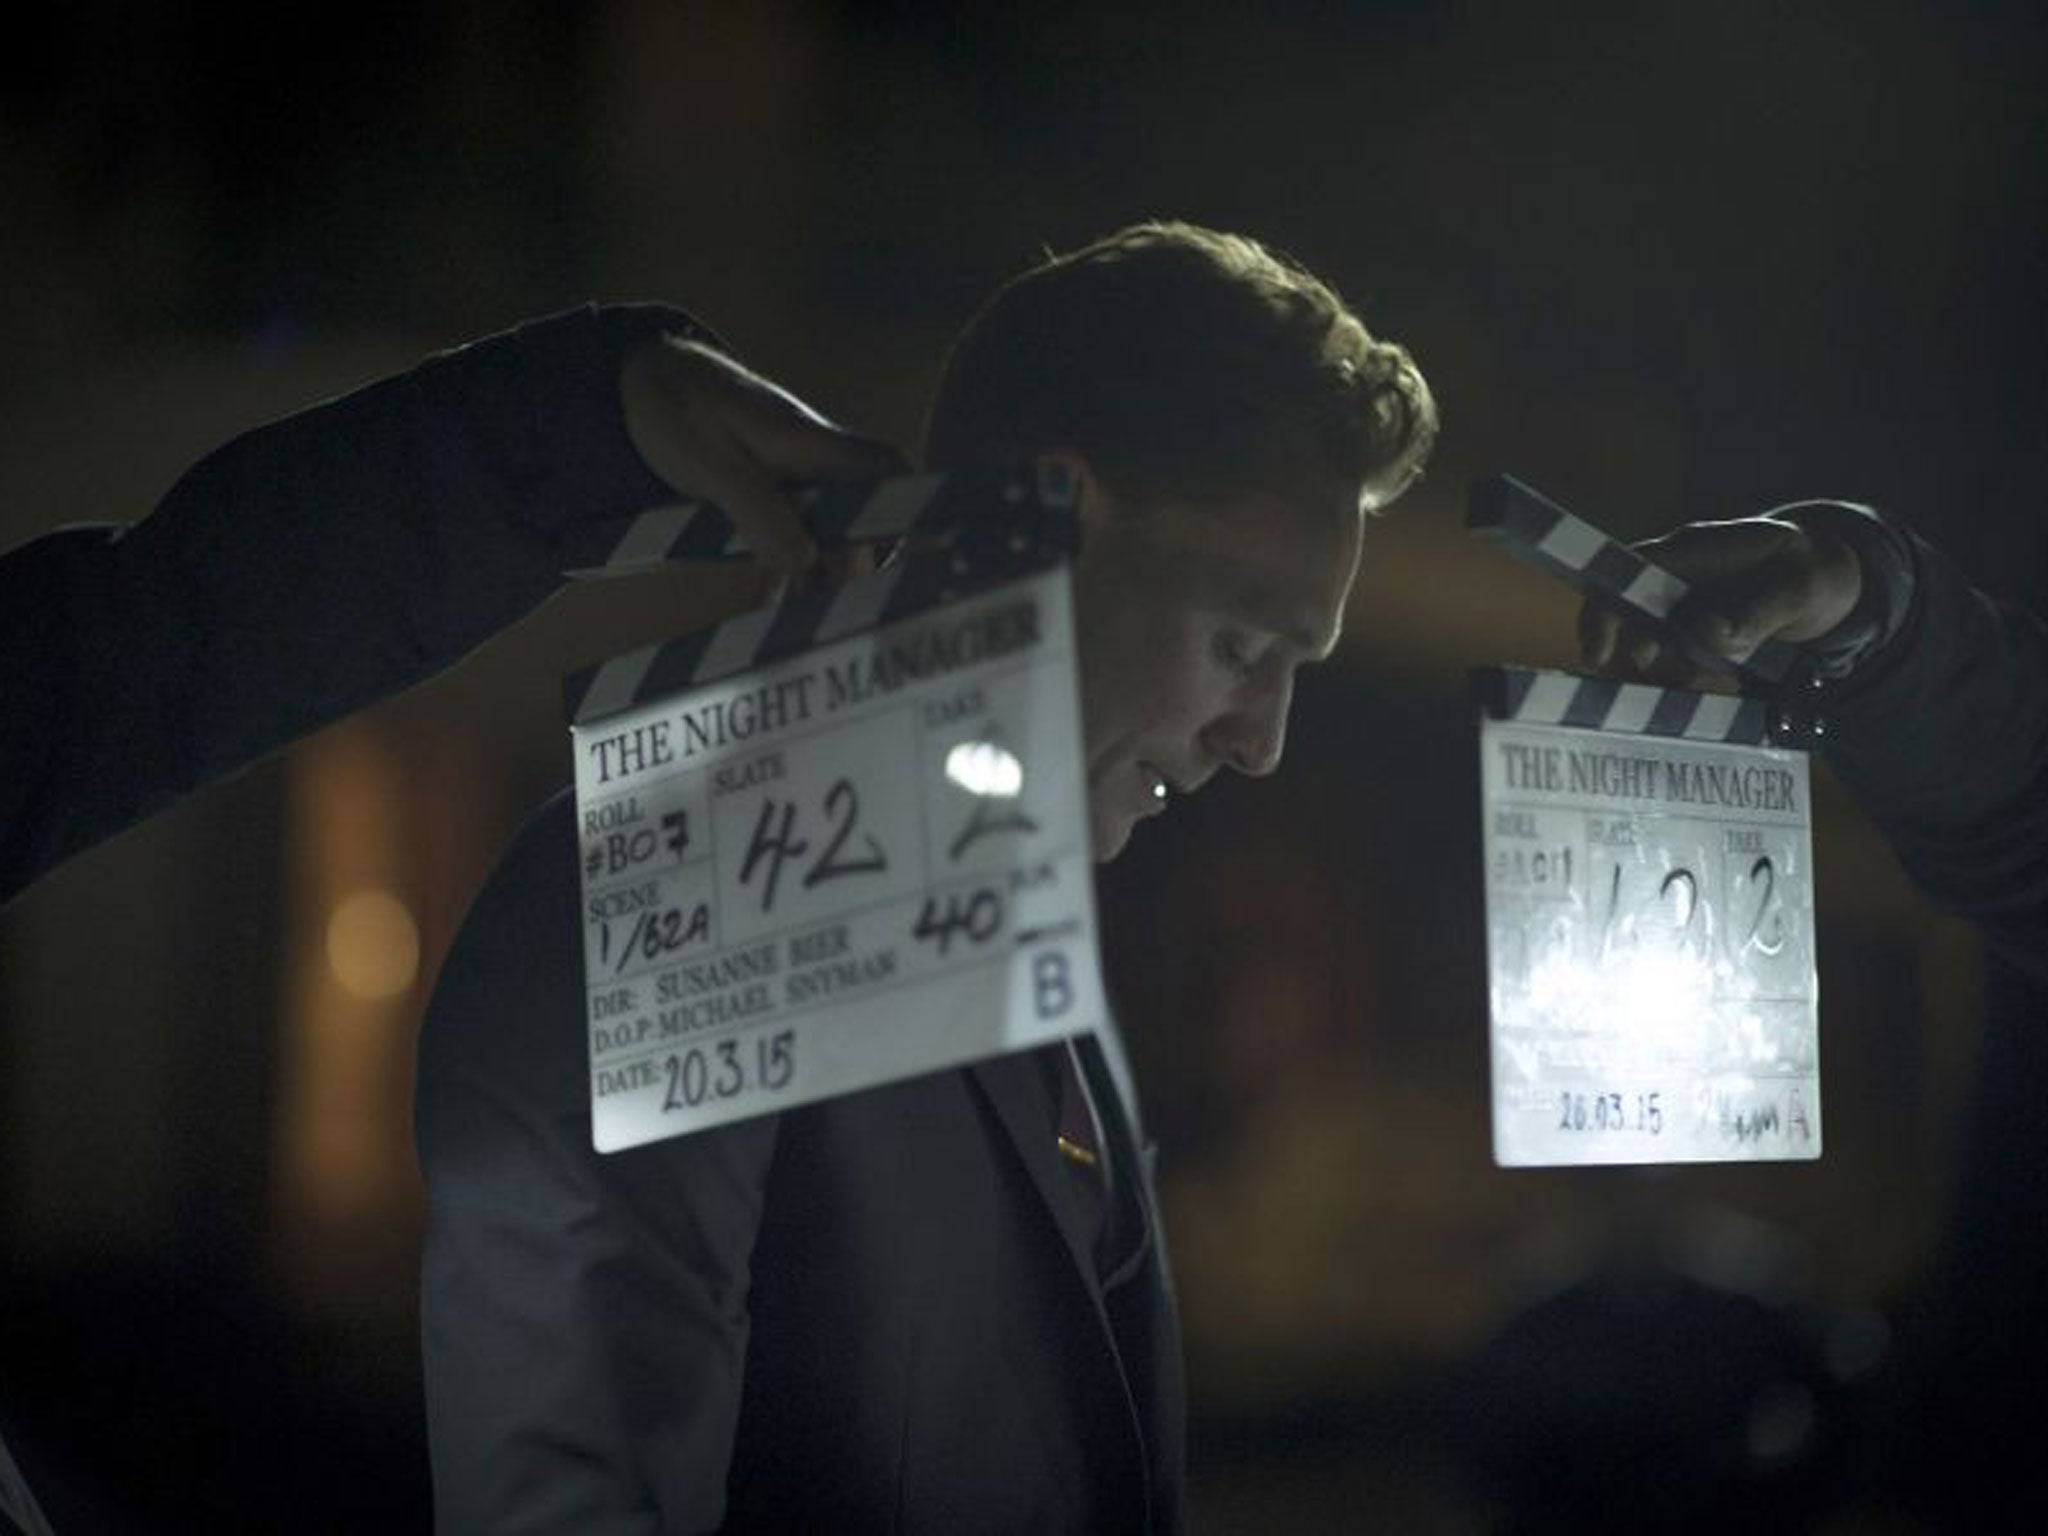 Shot in the dark: Tom Hiddleston on the set of The Night Manager